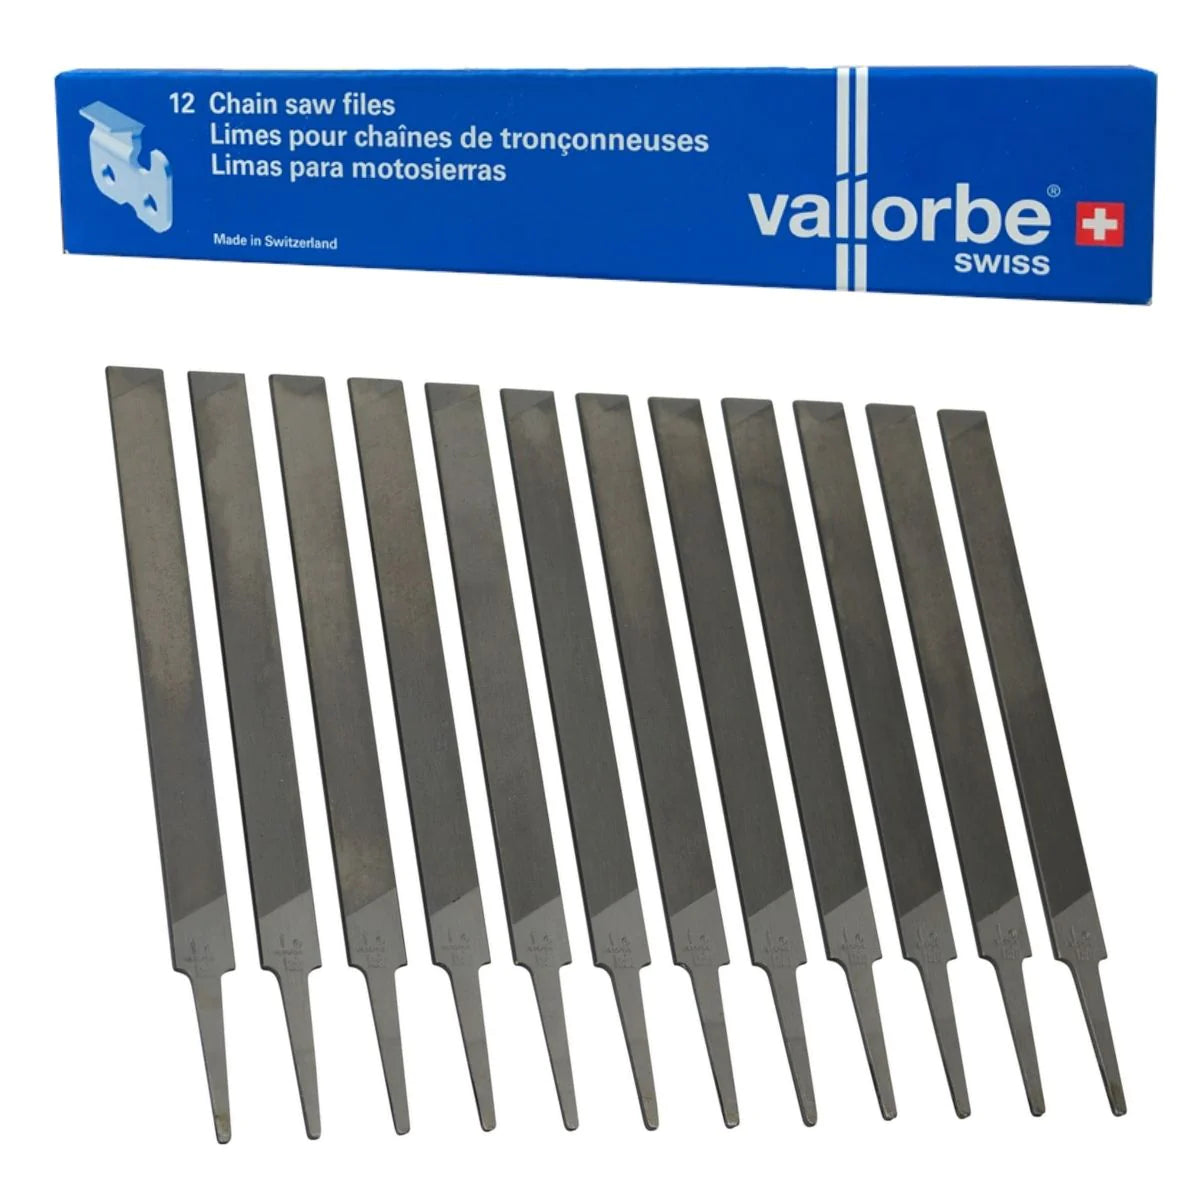 Vallorbe Flat Chainsaw Files 12 Pack